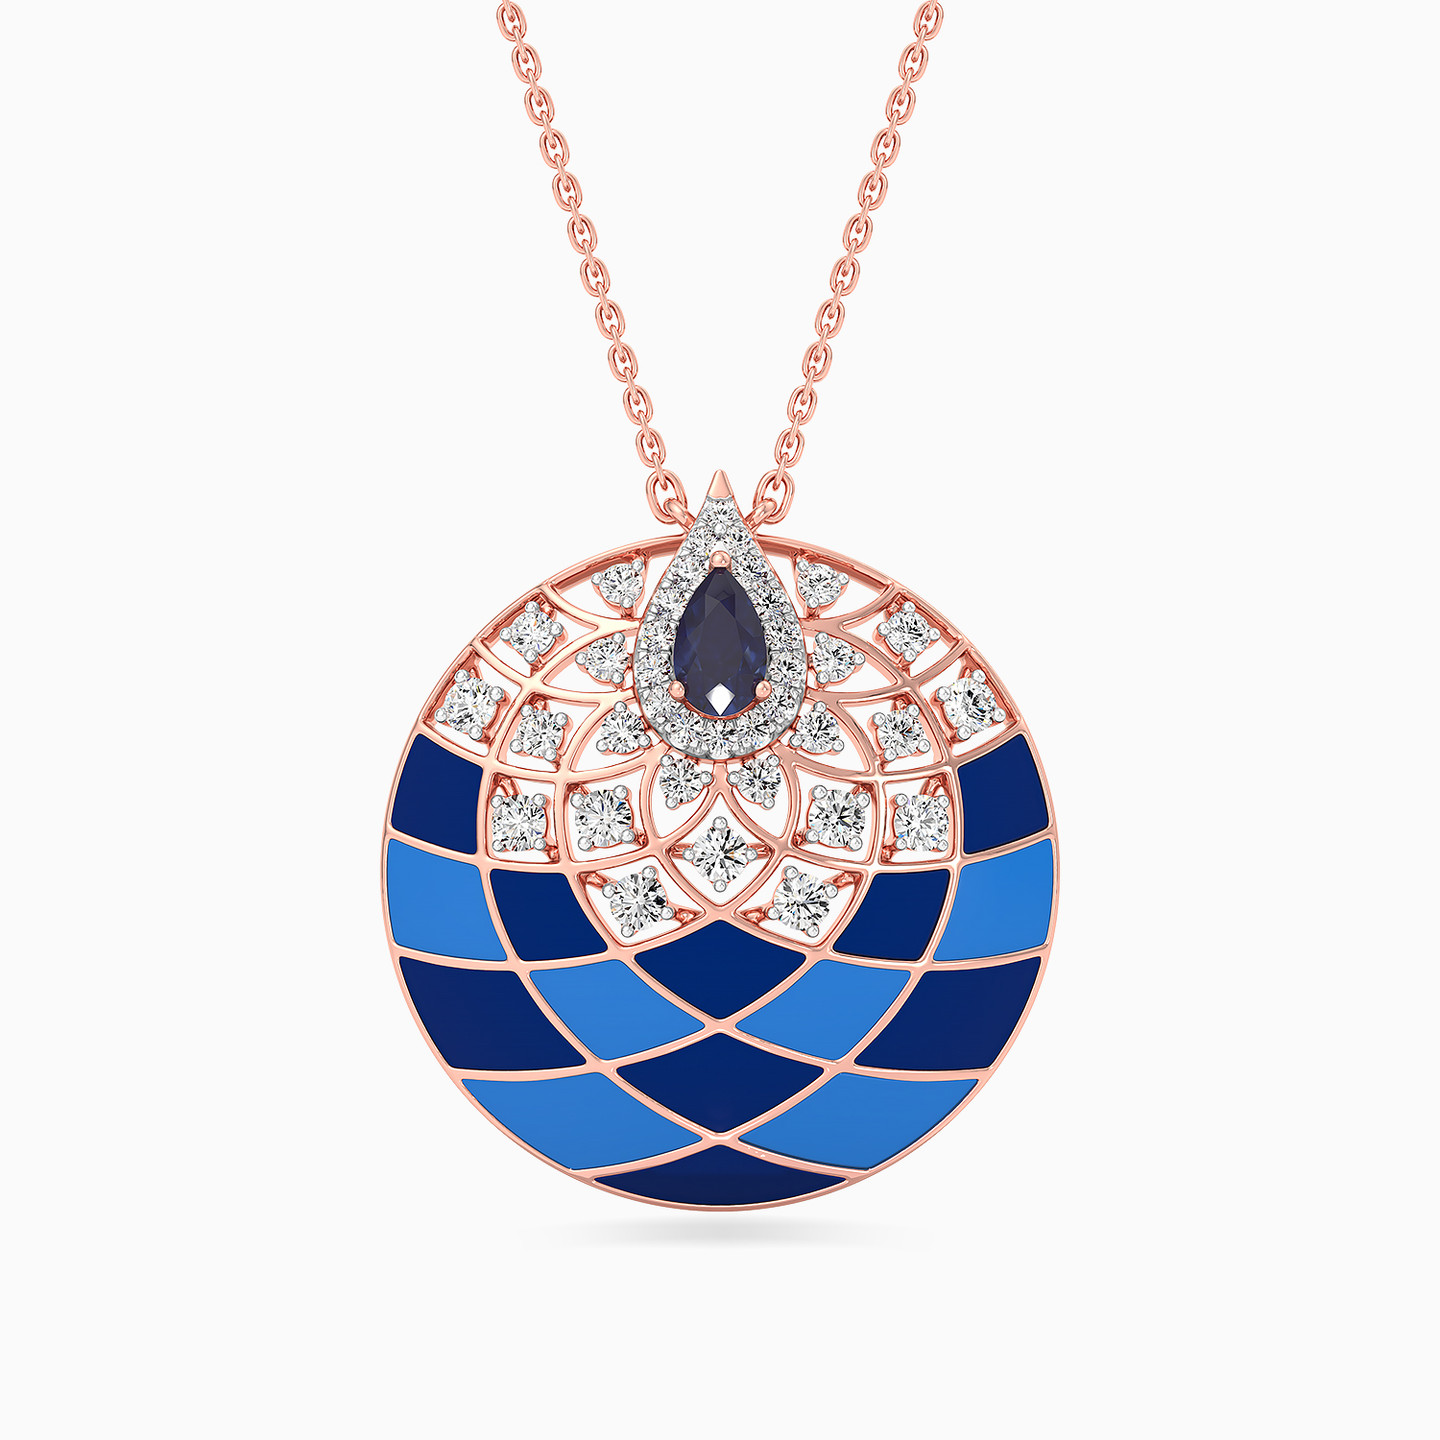 Circle Shaped Diamond & Enamel Coated with Colored Stones Pendant in 18K Gold